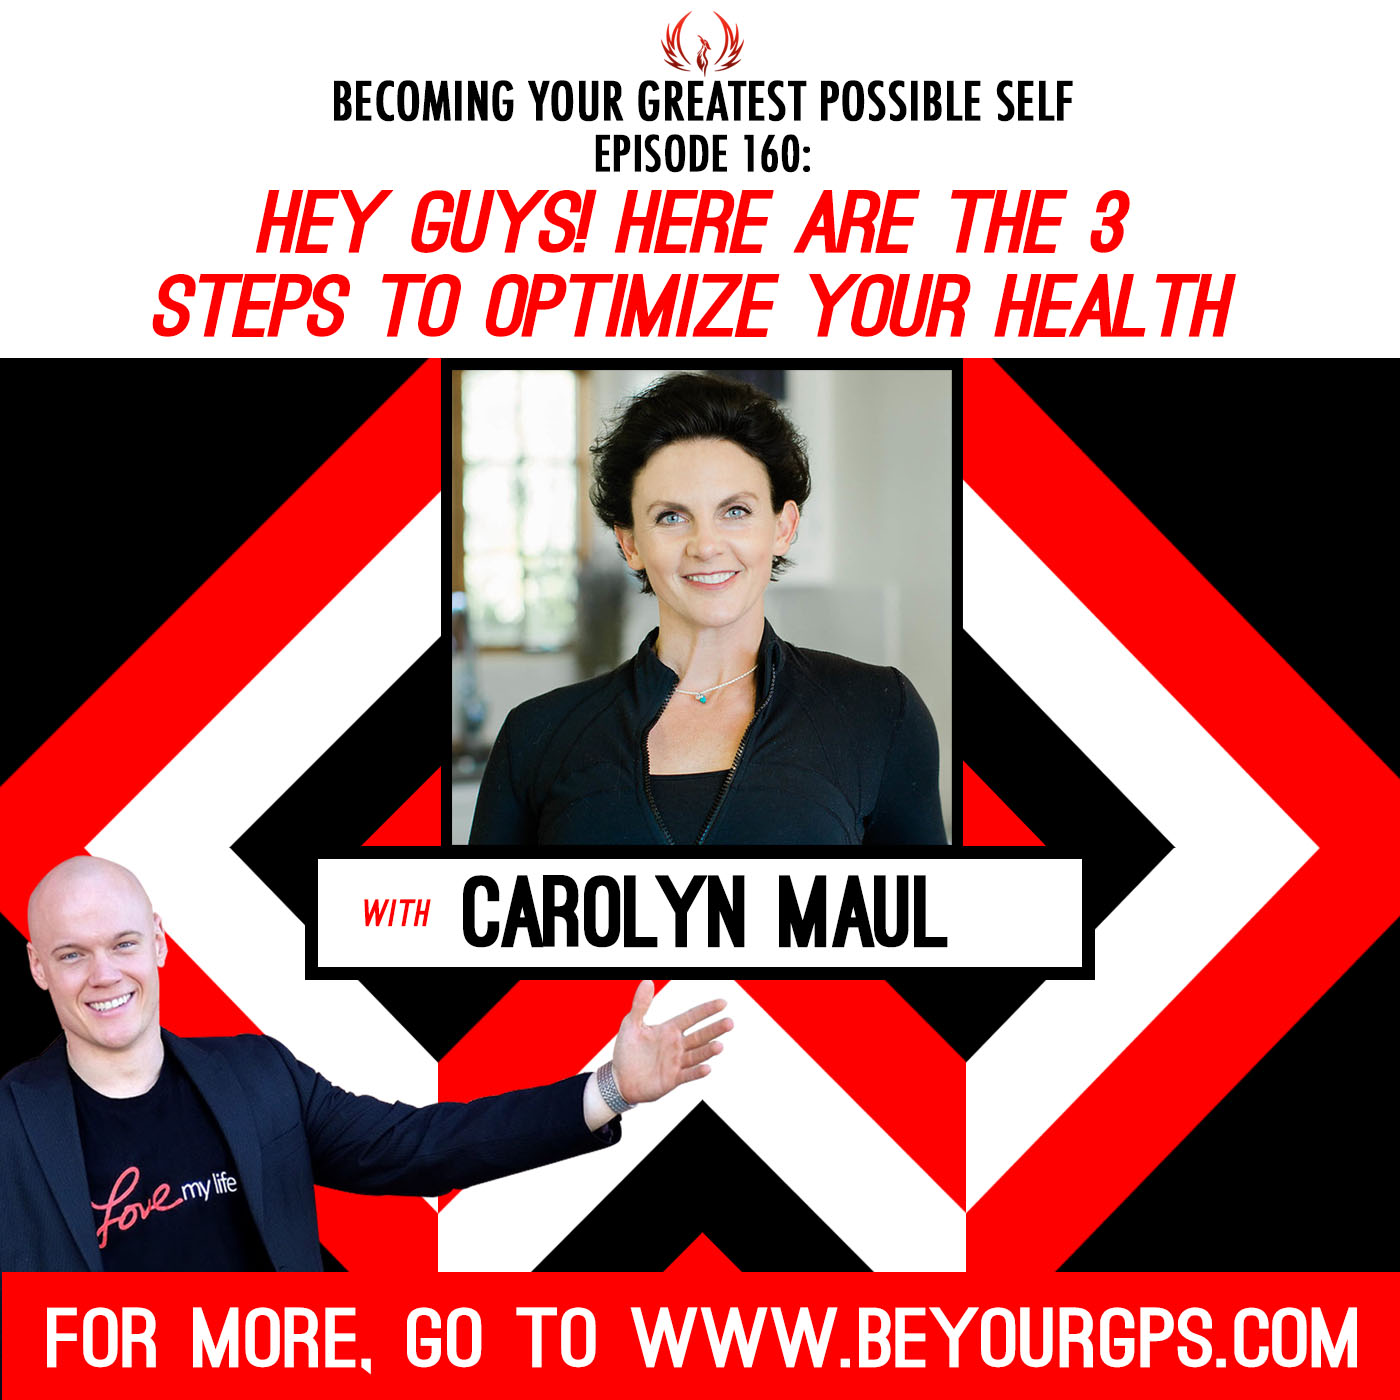 Hey GUYS! Here Are the 3 Steps to Optimize Your Health with Carolyn Maul